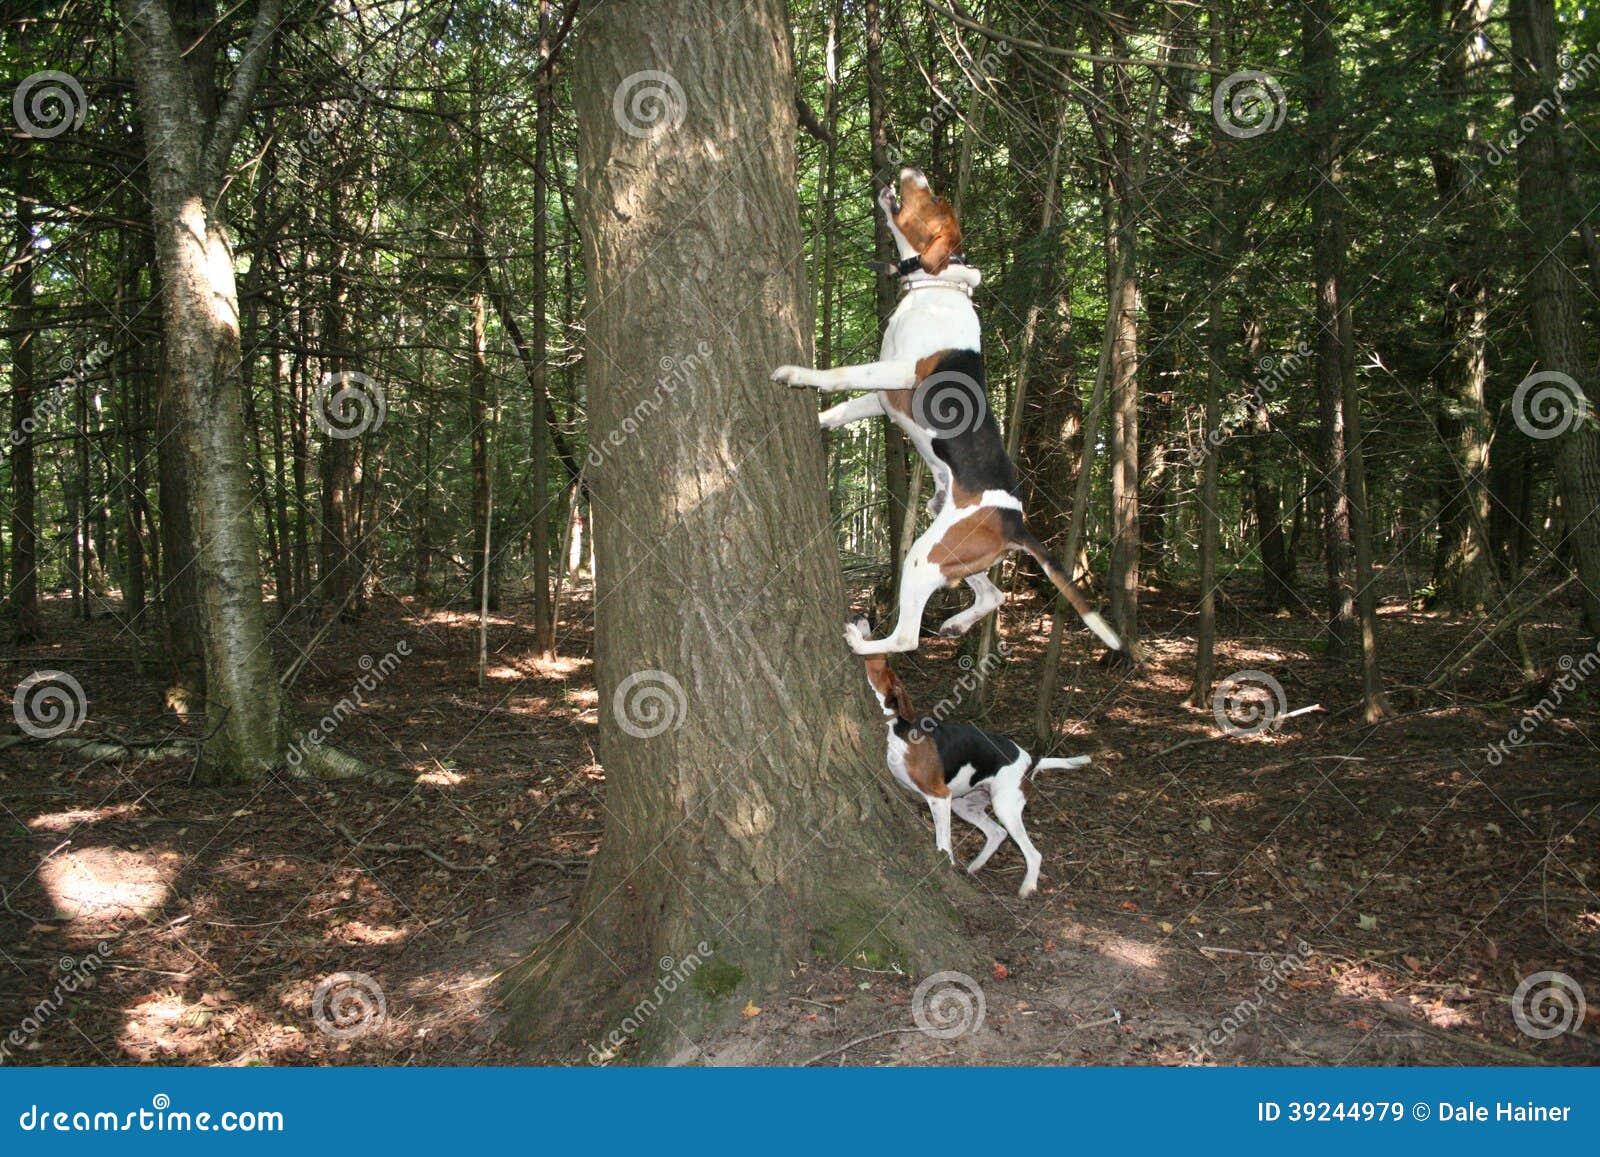 walker-coon-hound-baying-tree-pair-has-raccoon-barks-lively-waiting-hunter-to-arrive-39244979.jpg